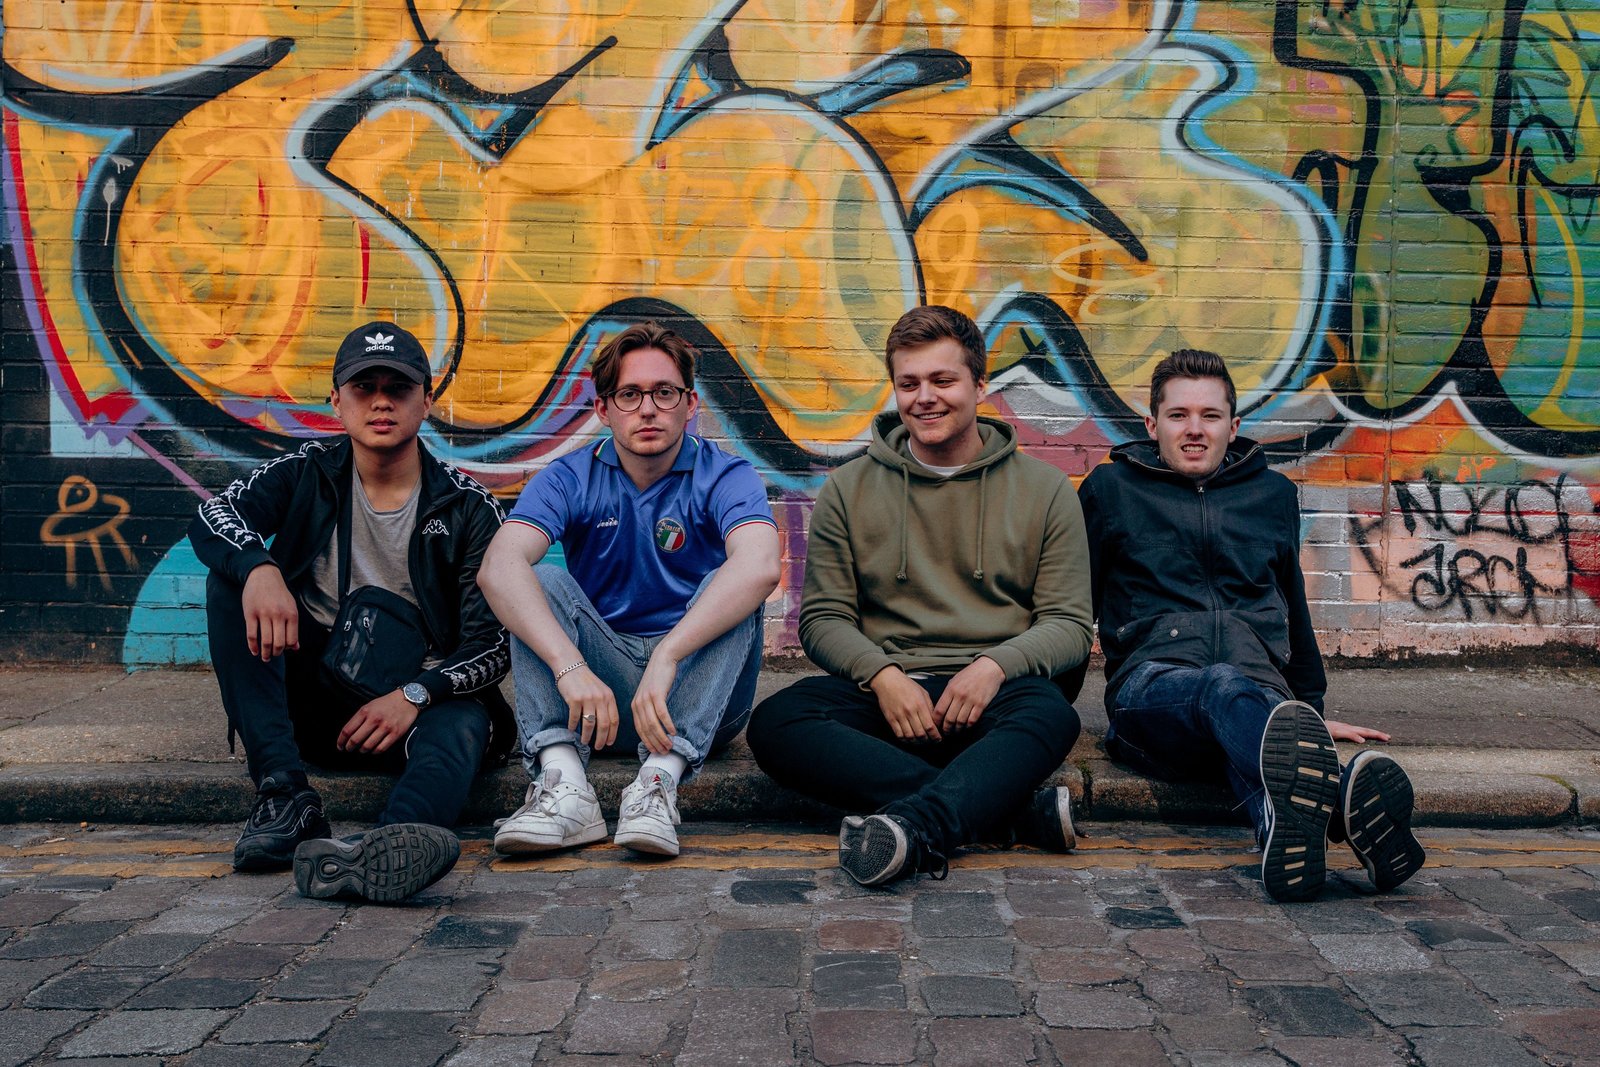 RAMES sat on a curb in Shoreditch during their press shoot